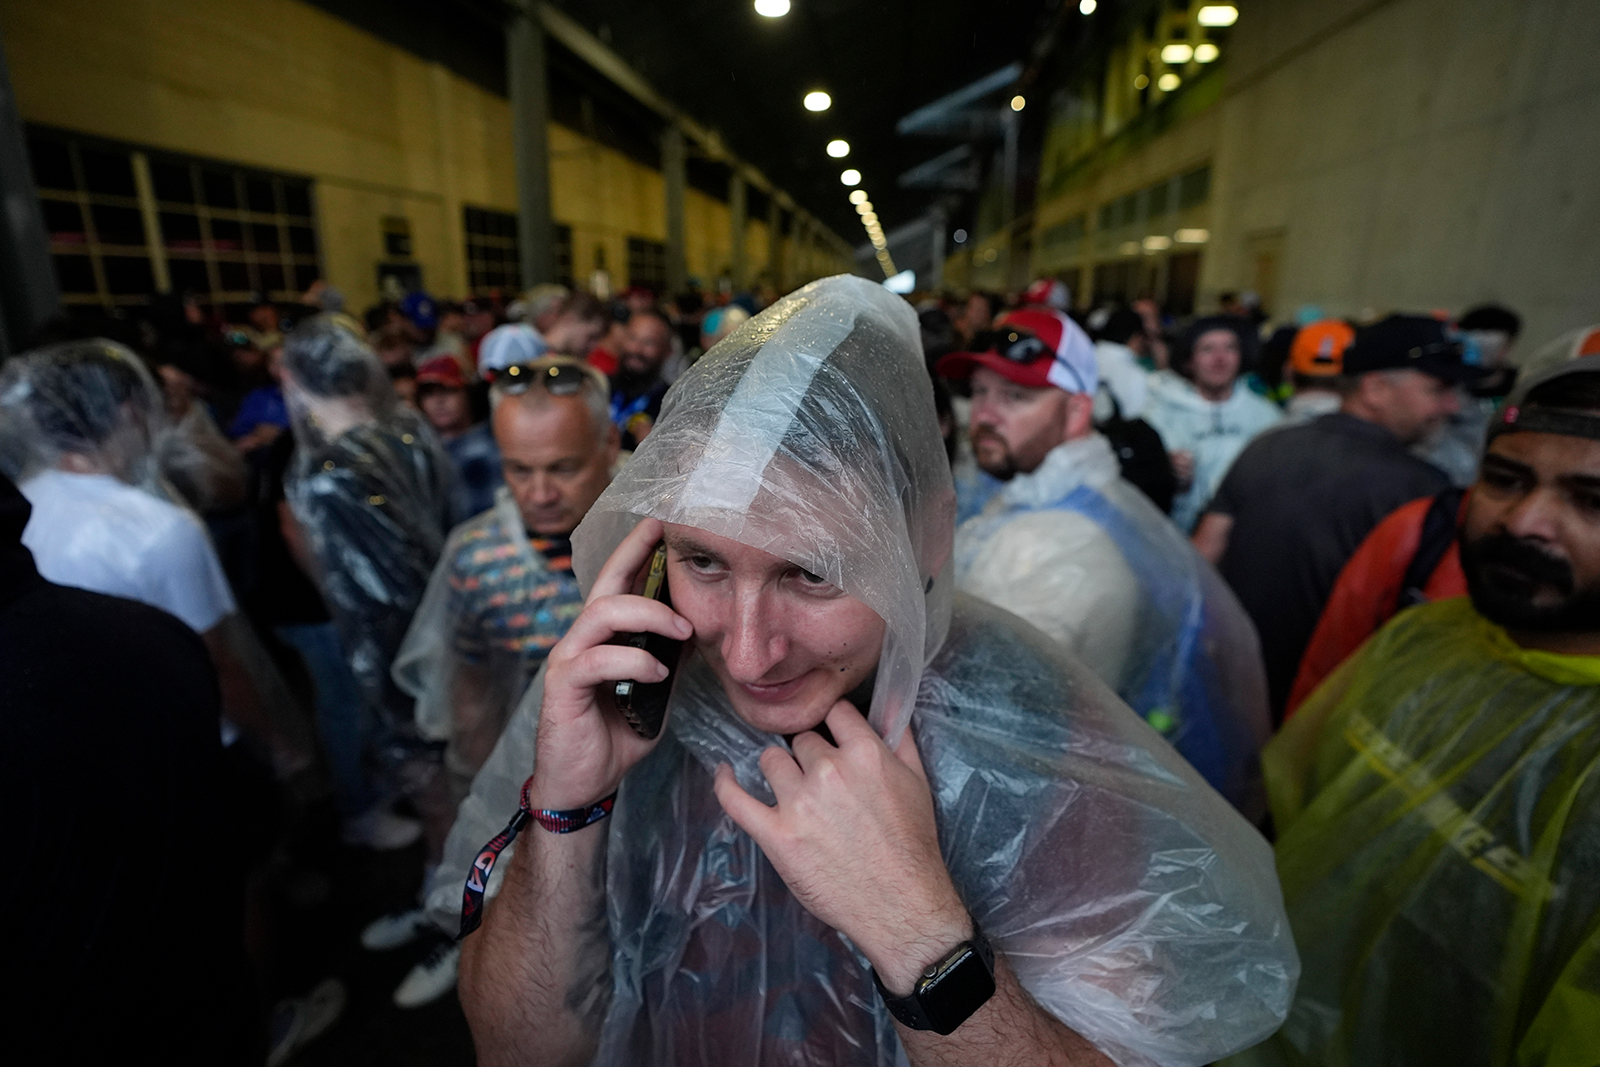 A race fan makes a phone call while trying to stay dry during a weather advisory before the Indianapolis 500 auto race at Indianapolis Motor Speedway, in Indianapolis, Indiana on May 26.